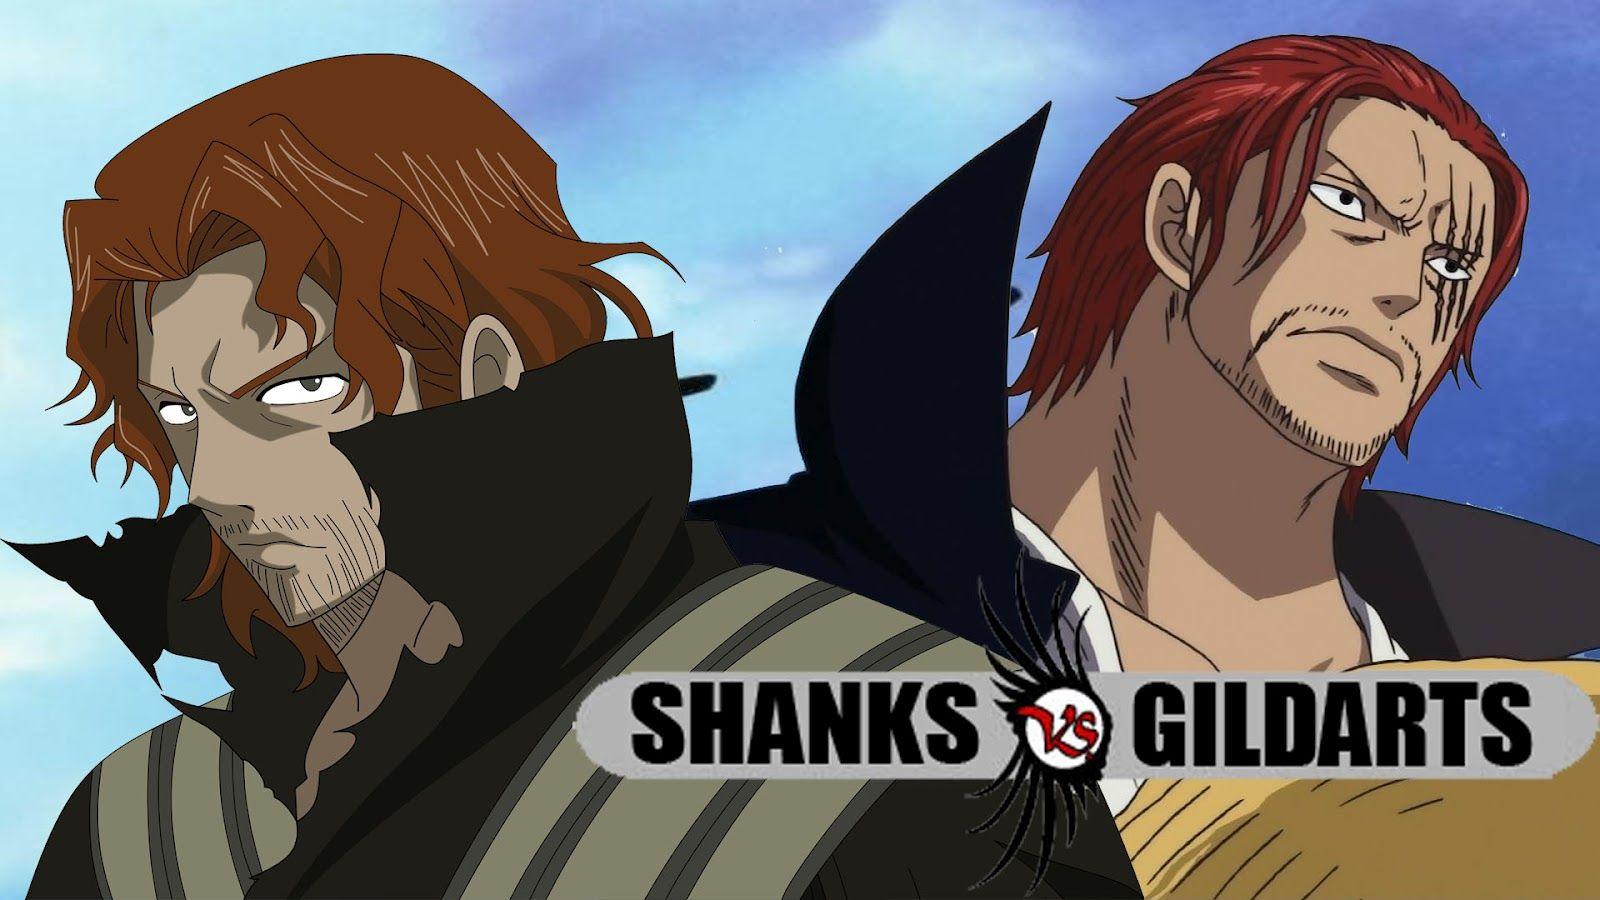 Red Haired Shanks Vs Gildarts Clive. One Piece Forum